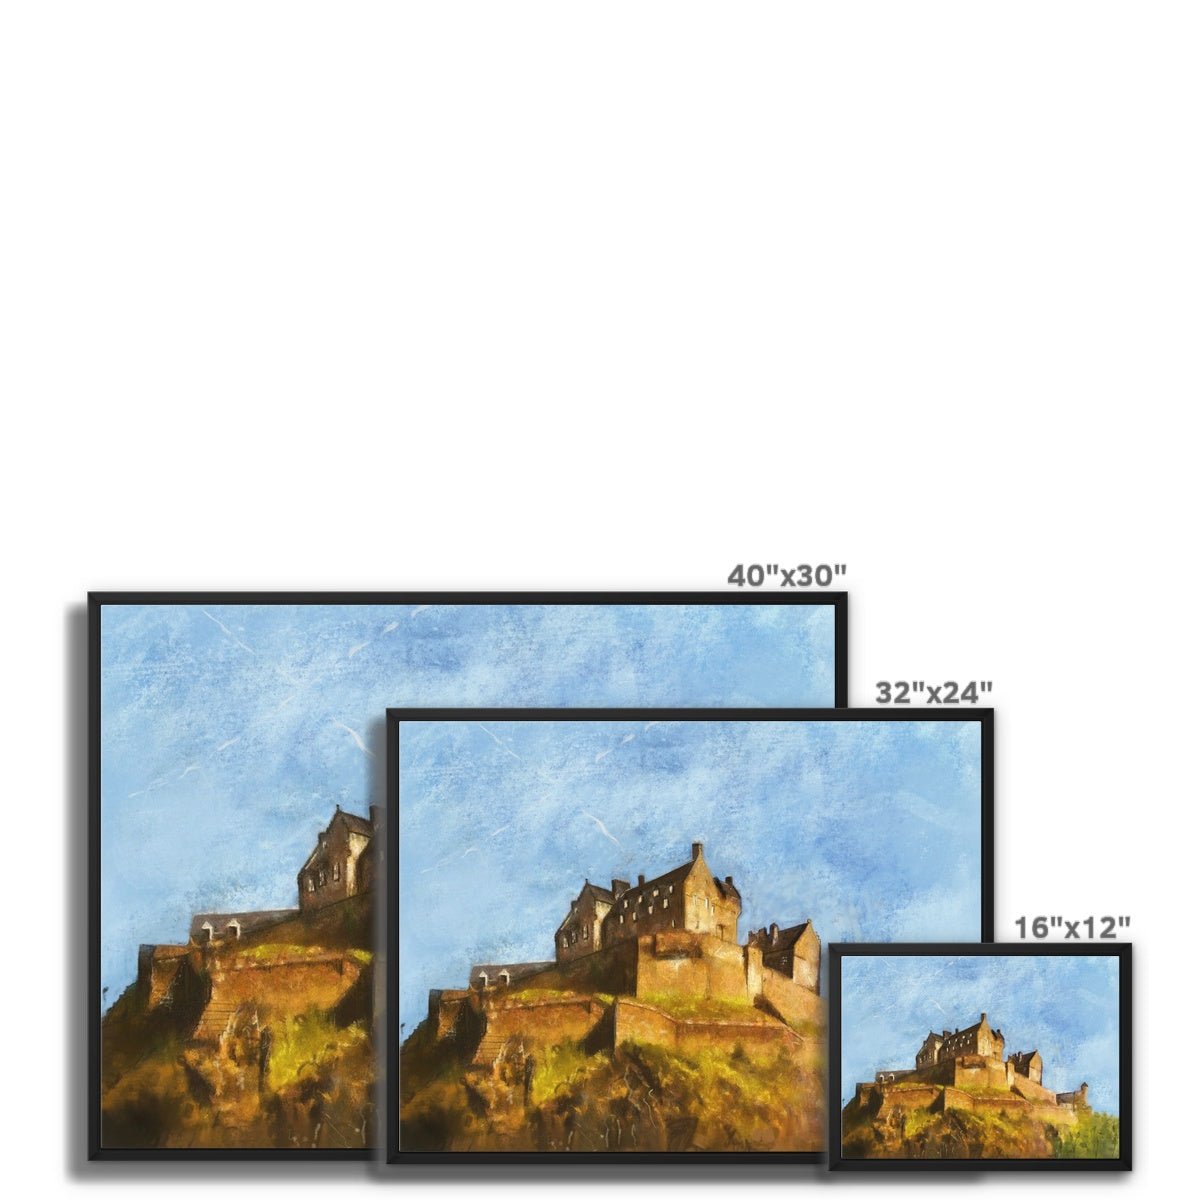 Edinburgh Castle Painting | Framed Canvas From Scotland-Floating Framed Canvas Prints-Historic & Iconic Scotland Art Gallery-Paintings, Prints, Homeware, Art Gifts From Scotland By Scottish Artist Kevin Hunter